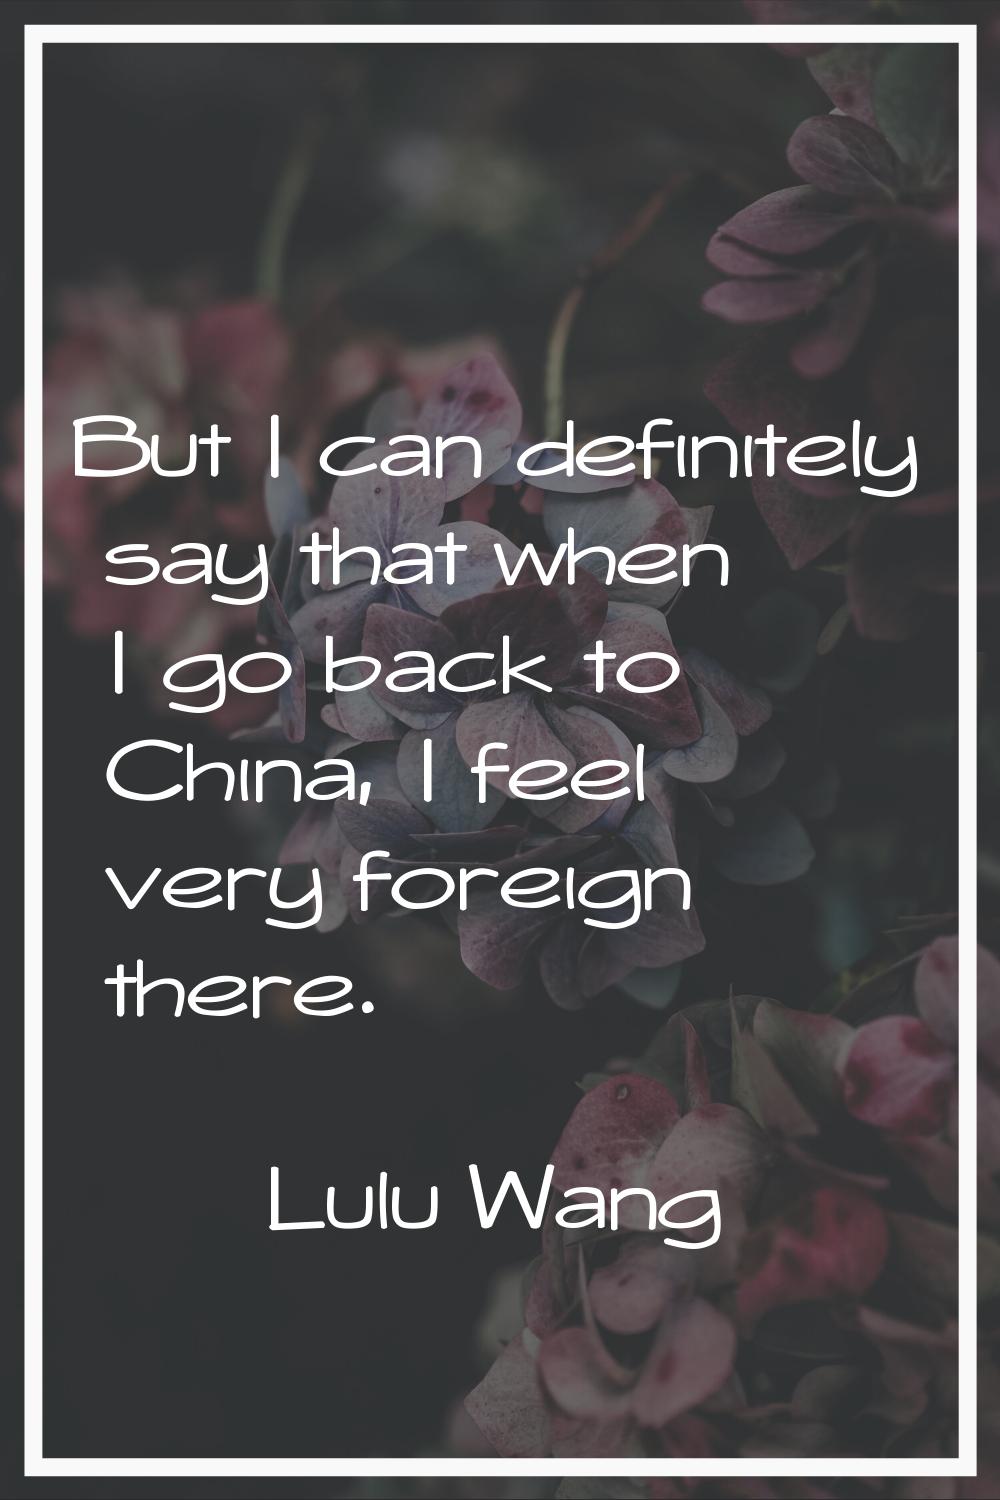 But I can definitely say that when I go back to China, I feel very foreign there.